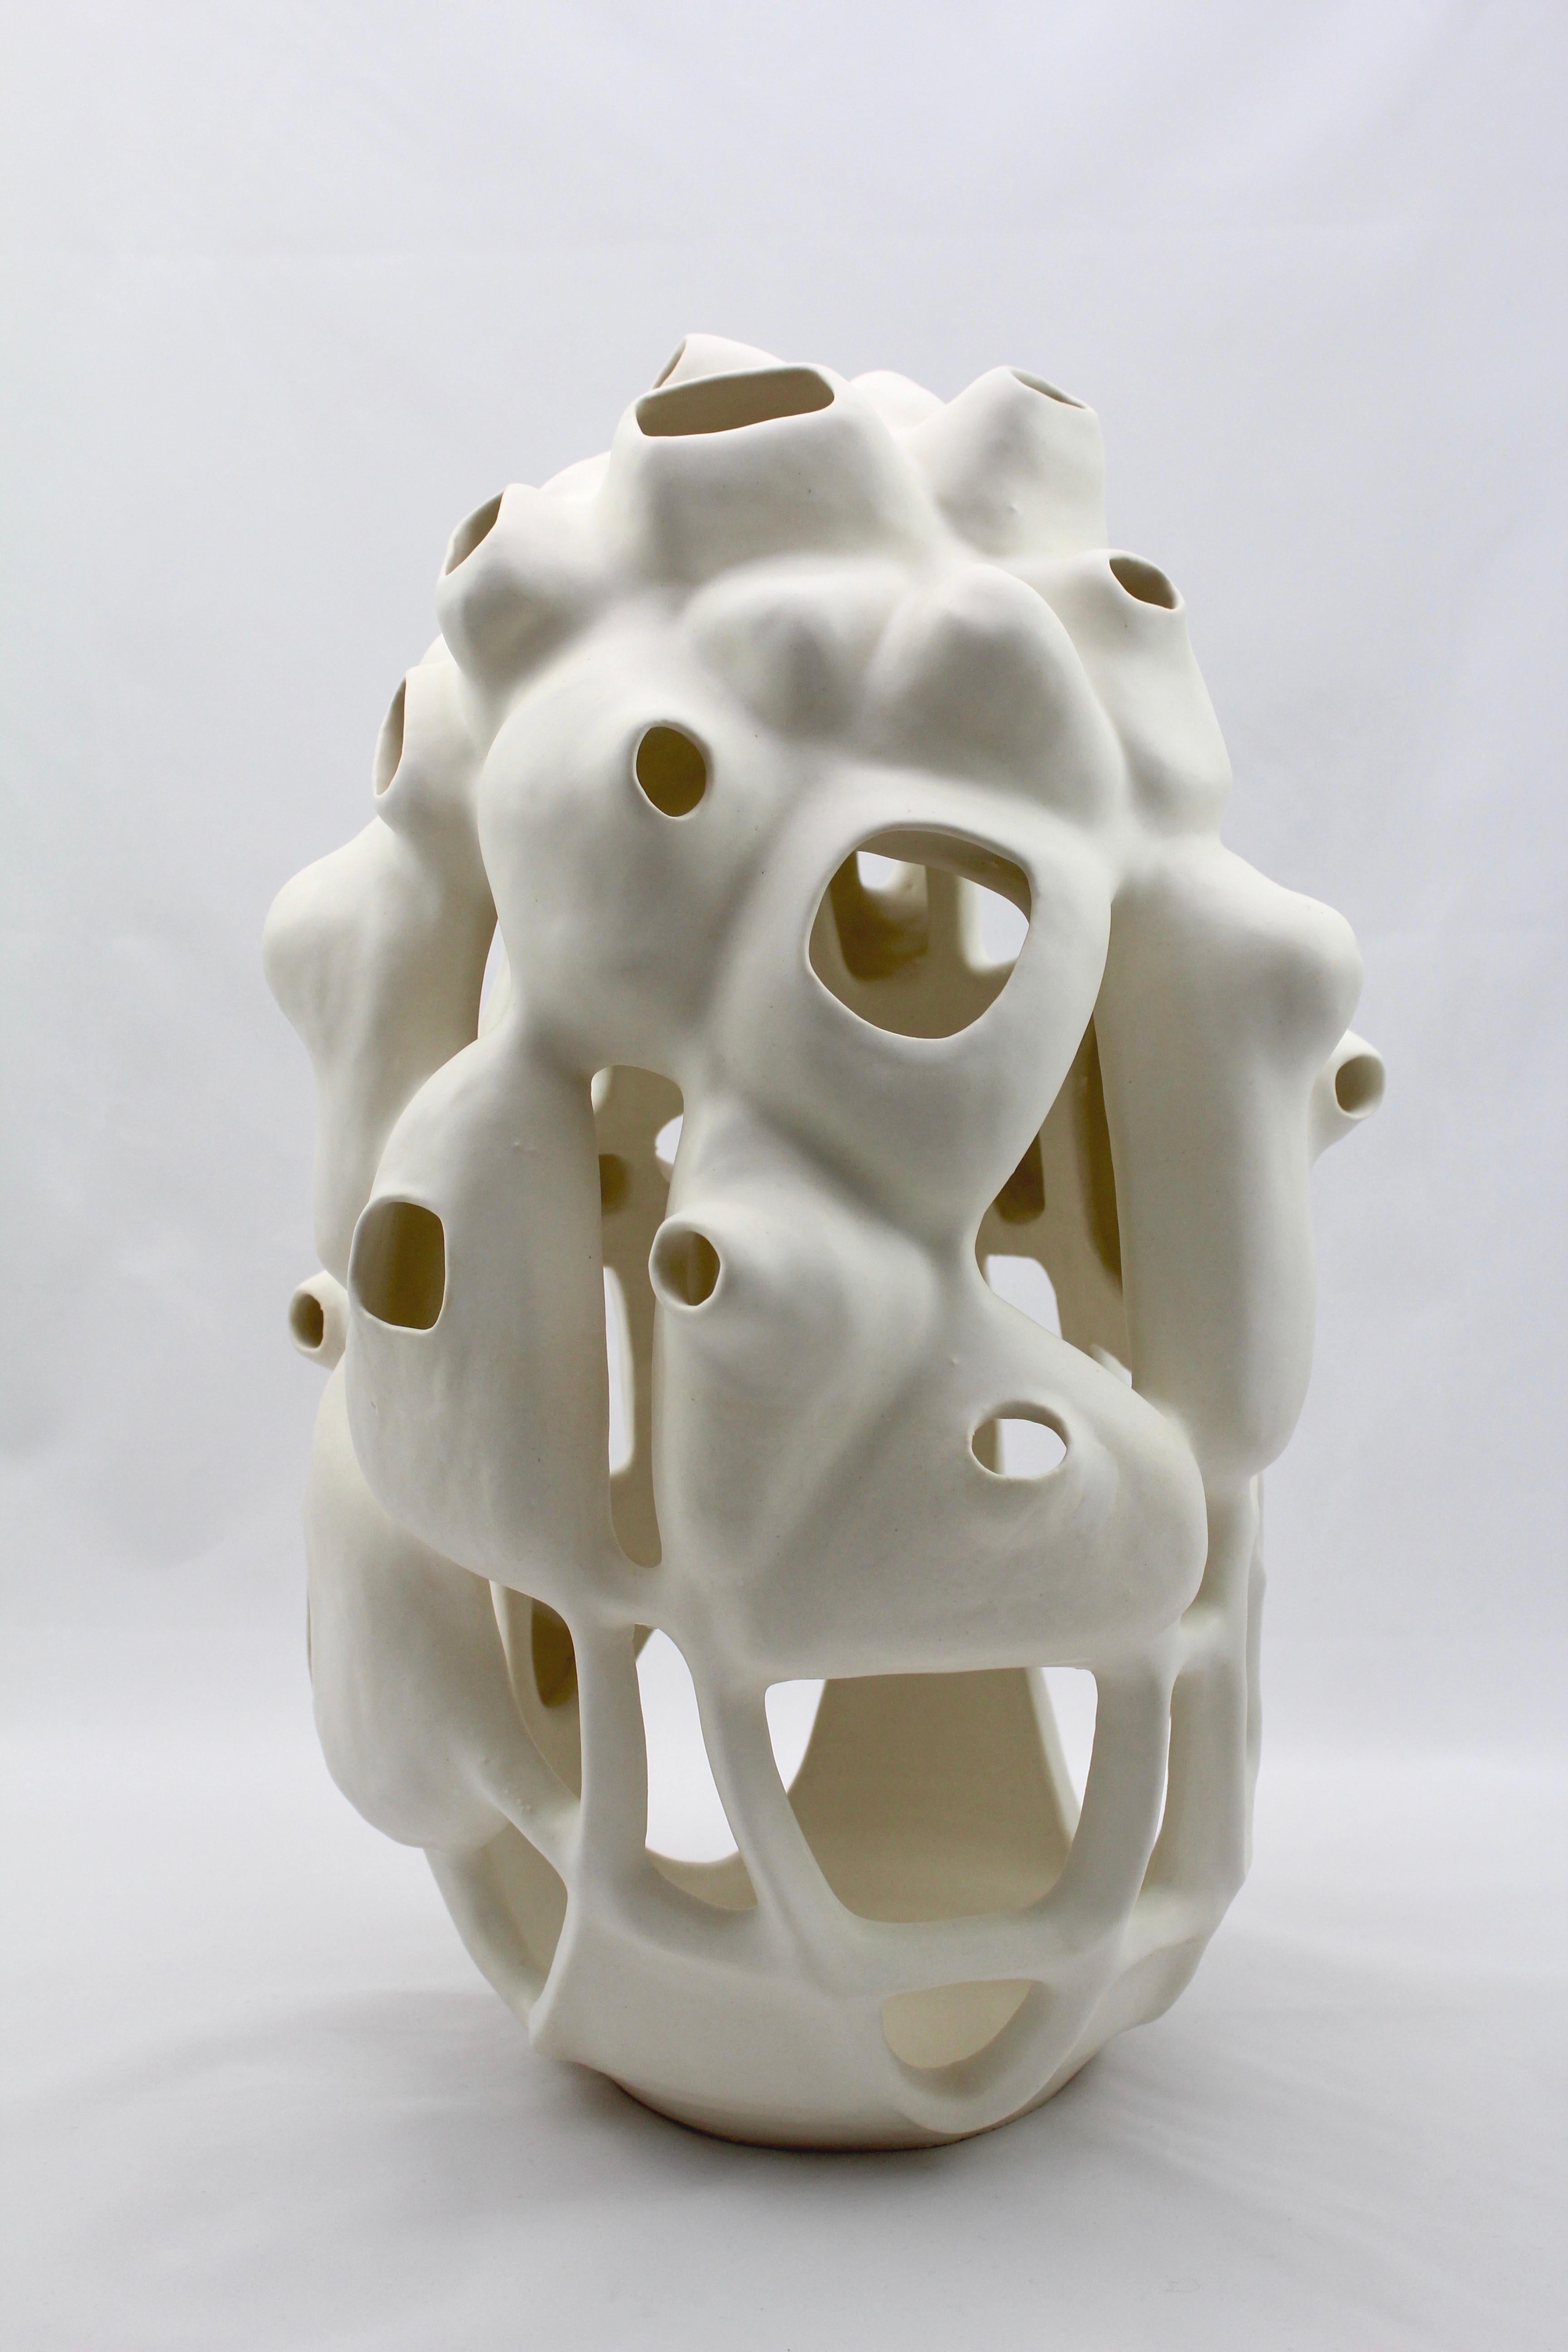 Joan Lurie Abstract Sculpture - Untitled #4 - abstract geometric, organic white glazed porcelain sculpture 